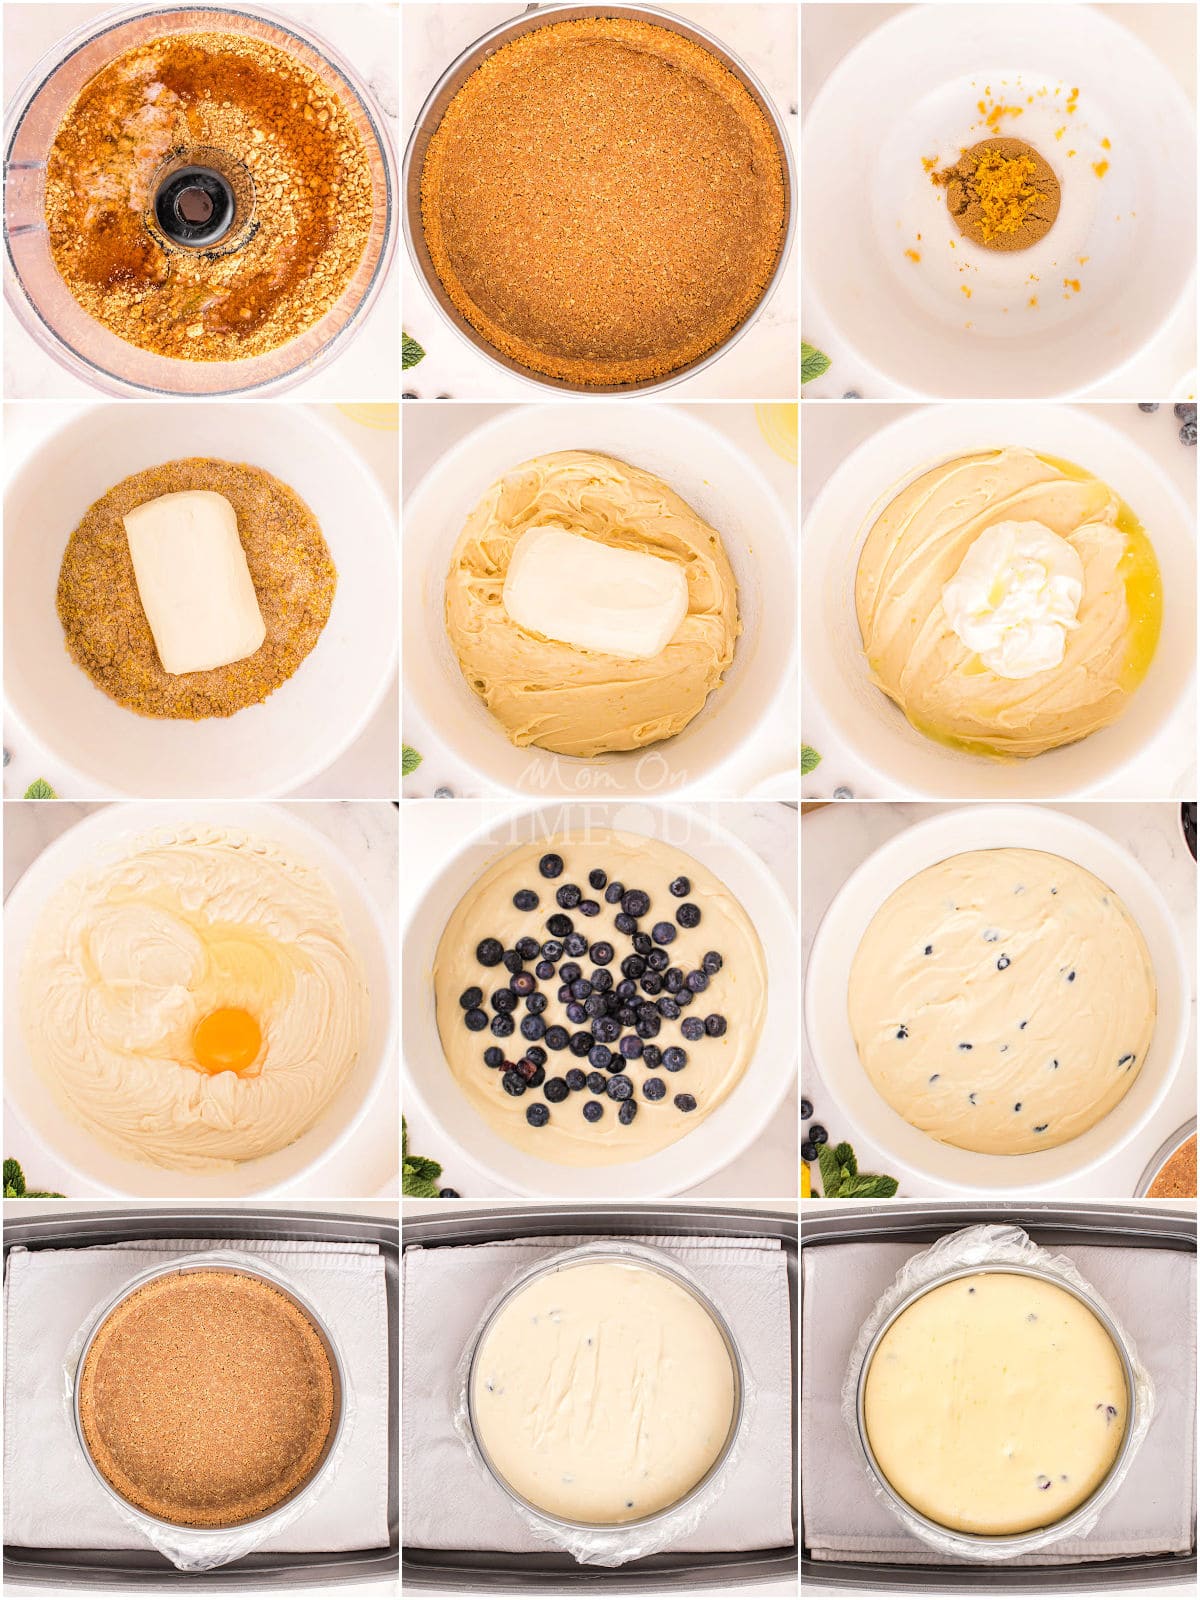 12 image collage showing step by step how to make the lemon blueberry cheesecake including the water bath.